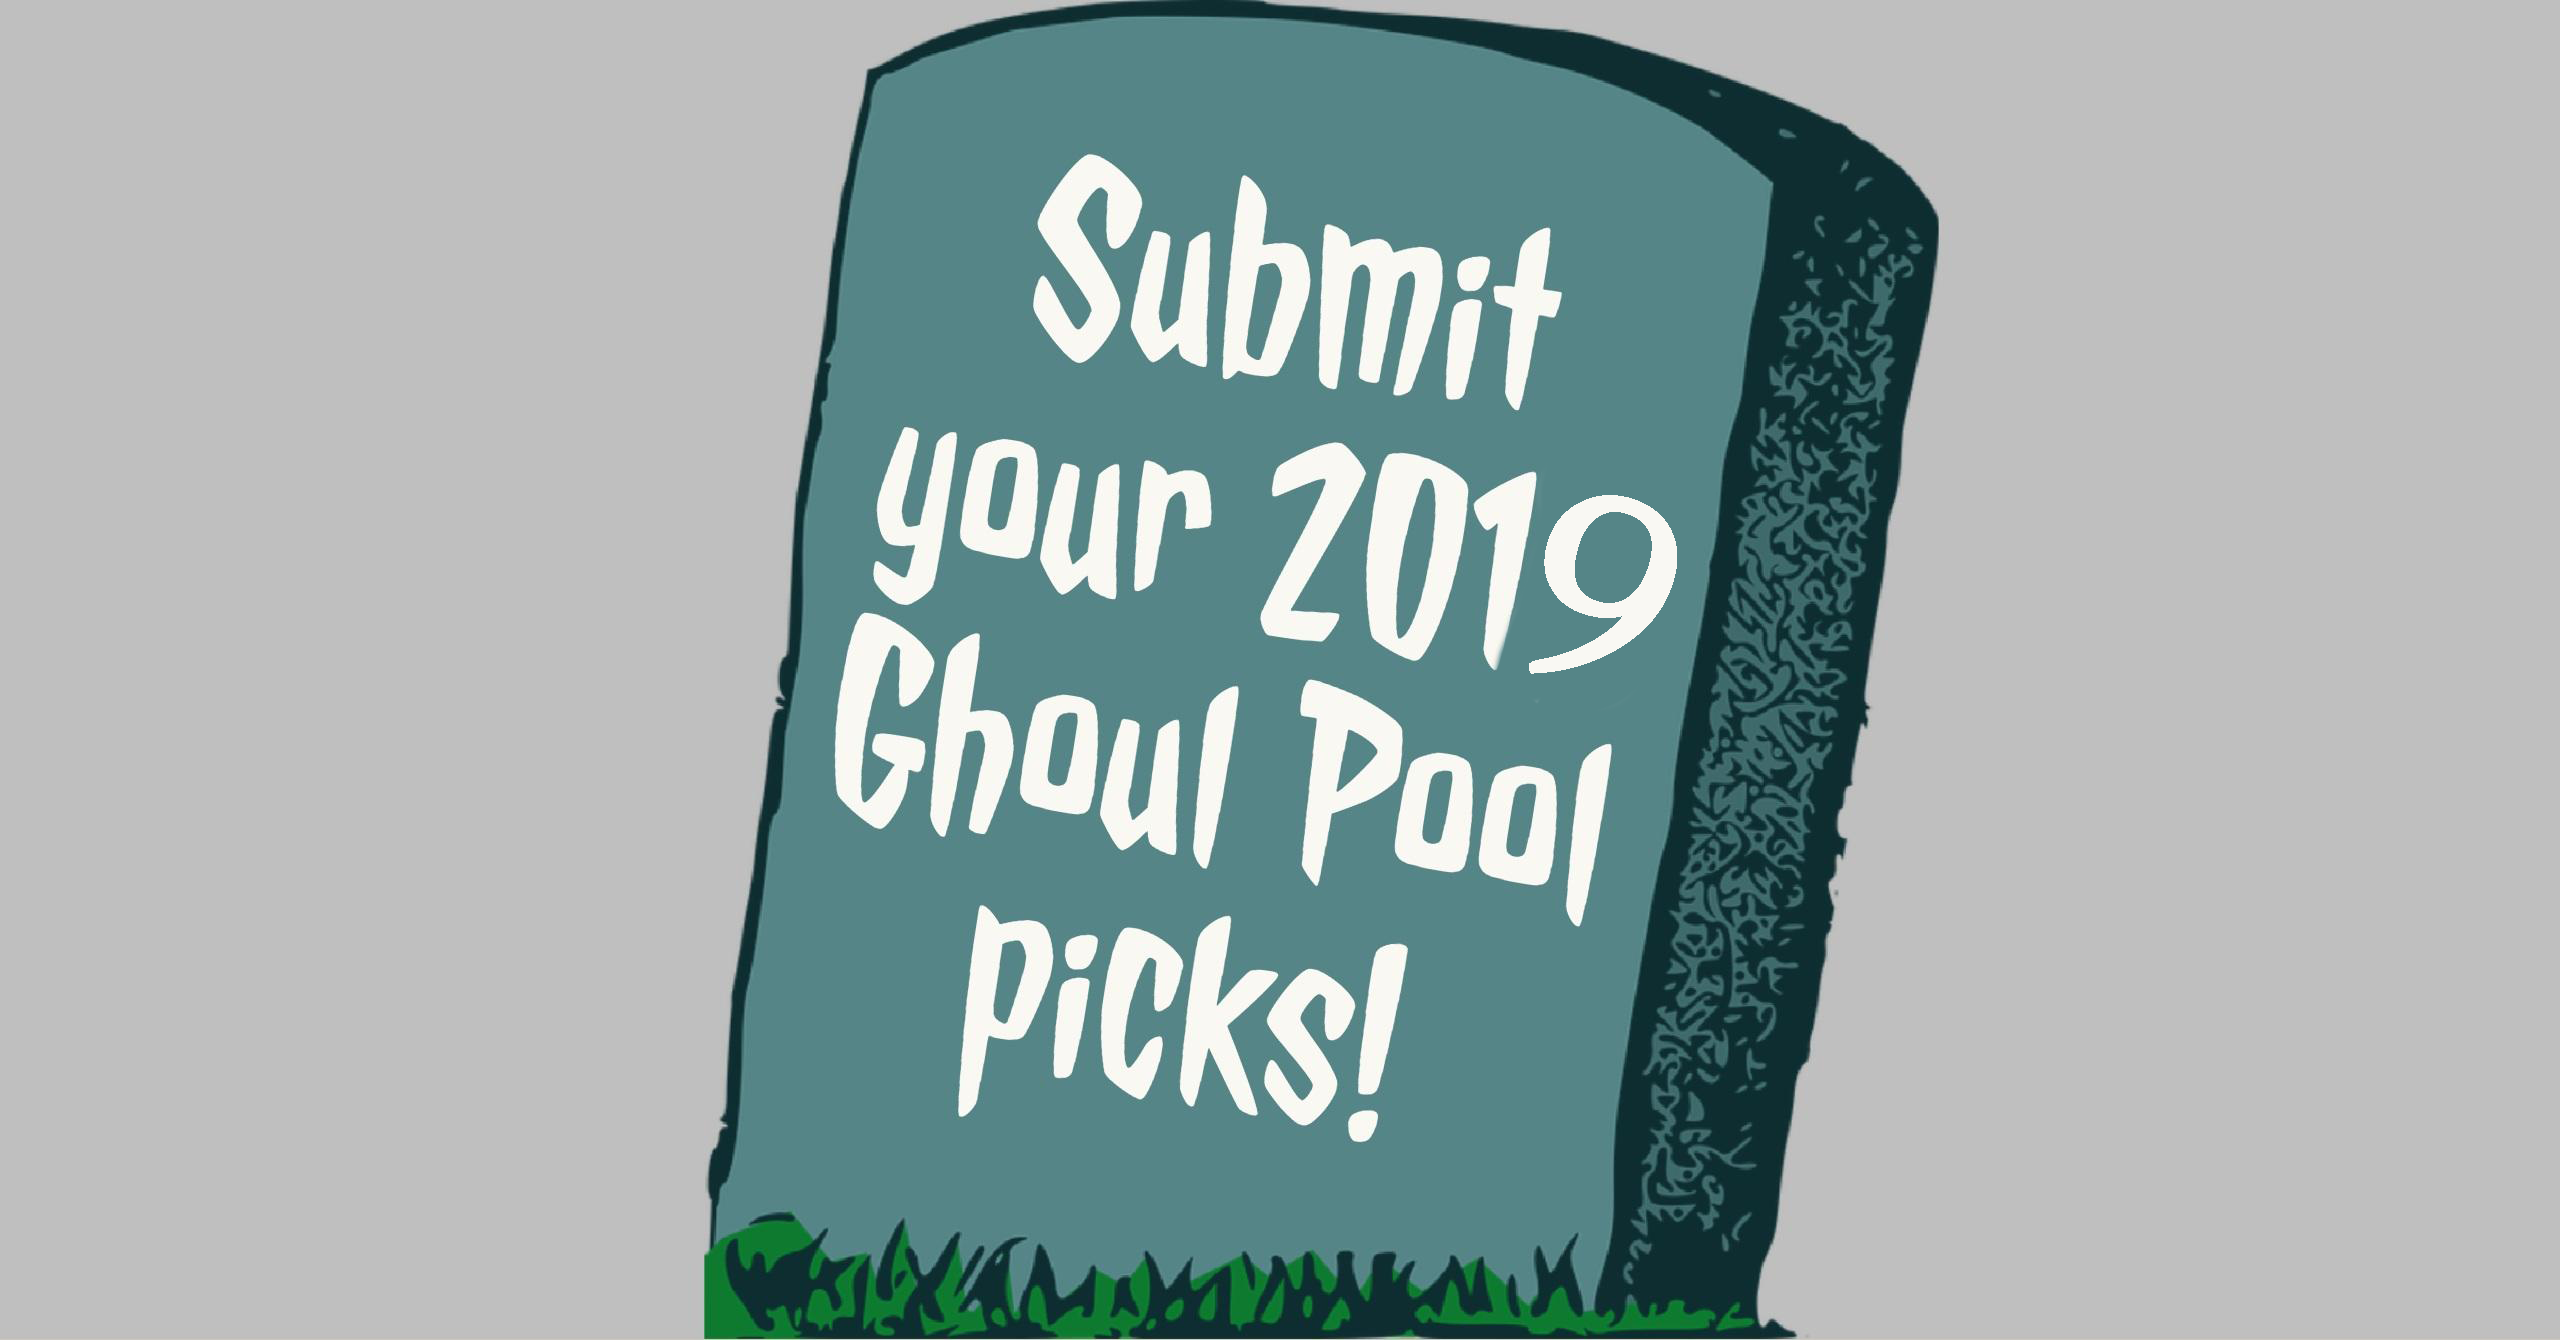 Submit your 2019 Ghoul Pool picks! - Thumbnail Image